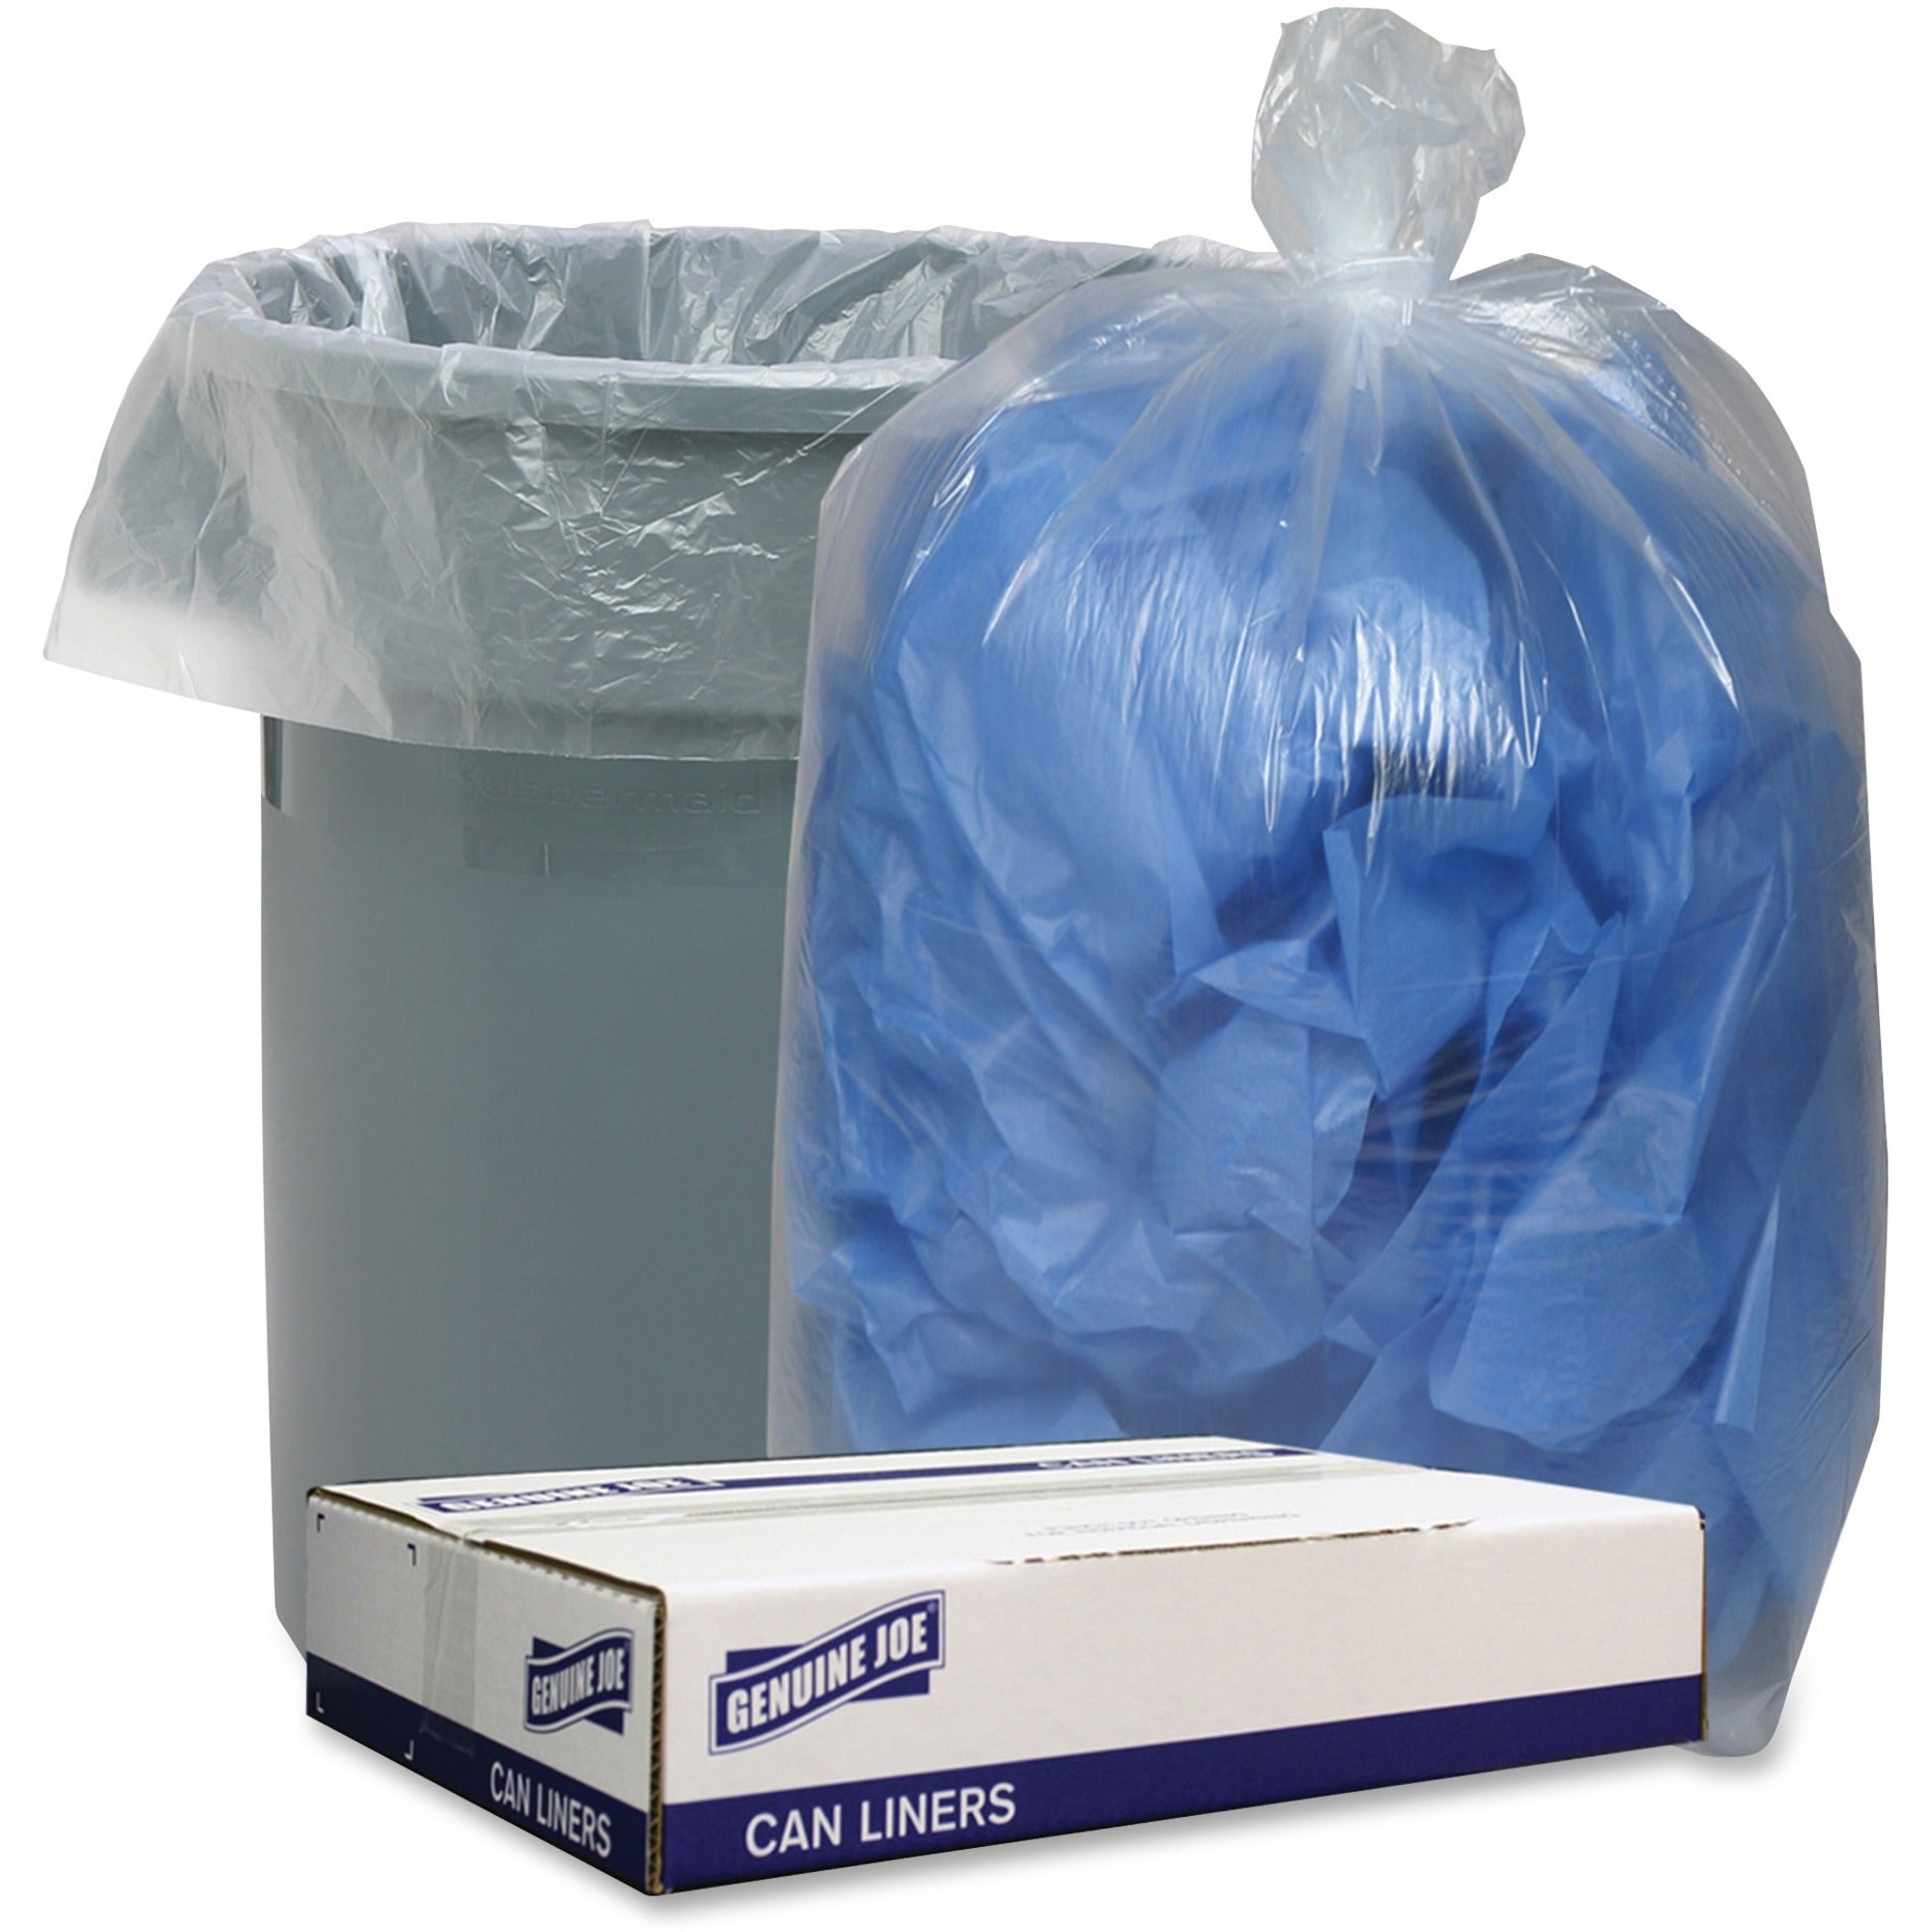 genuine-joe-clear-low-density-can-liners-60-gal-capacity-38-width-x-58-length-110-mil-28-micron-thickness-low-density-clear-100-carton-recycled_gjo29127 - 1